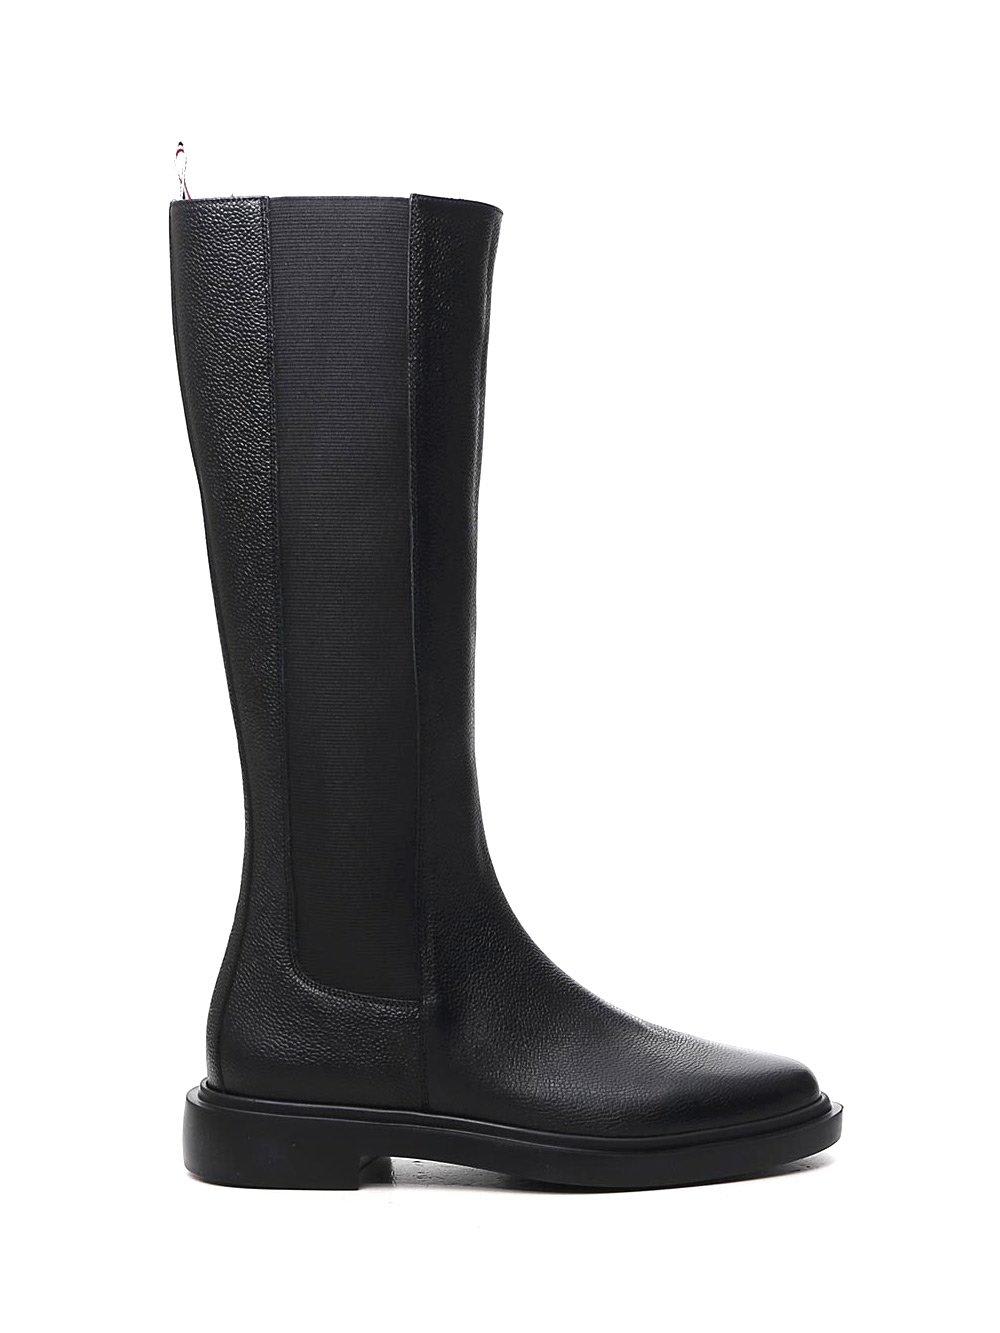 Thom Browne 4-bar Knee Length Chelsea Boots